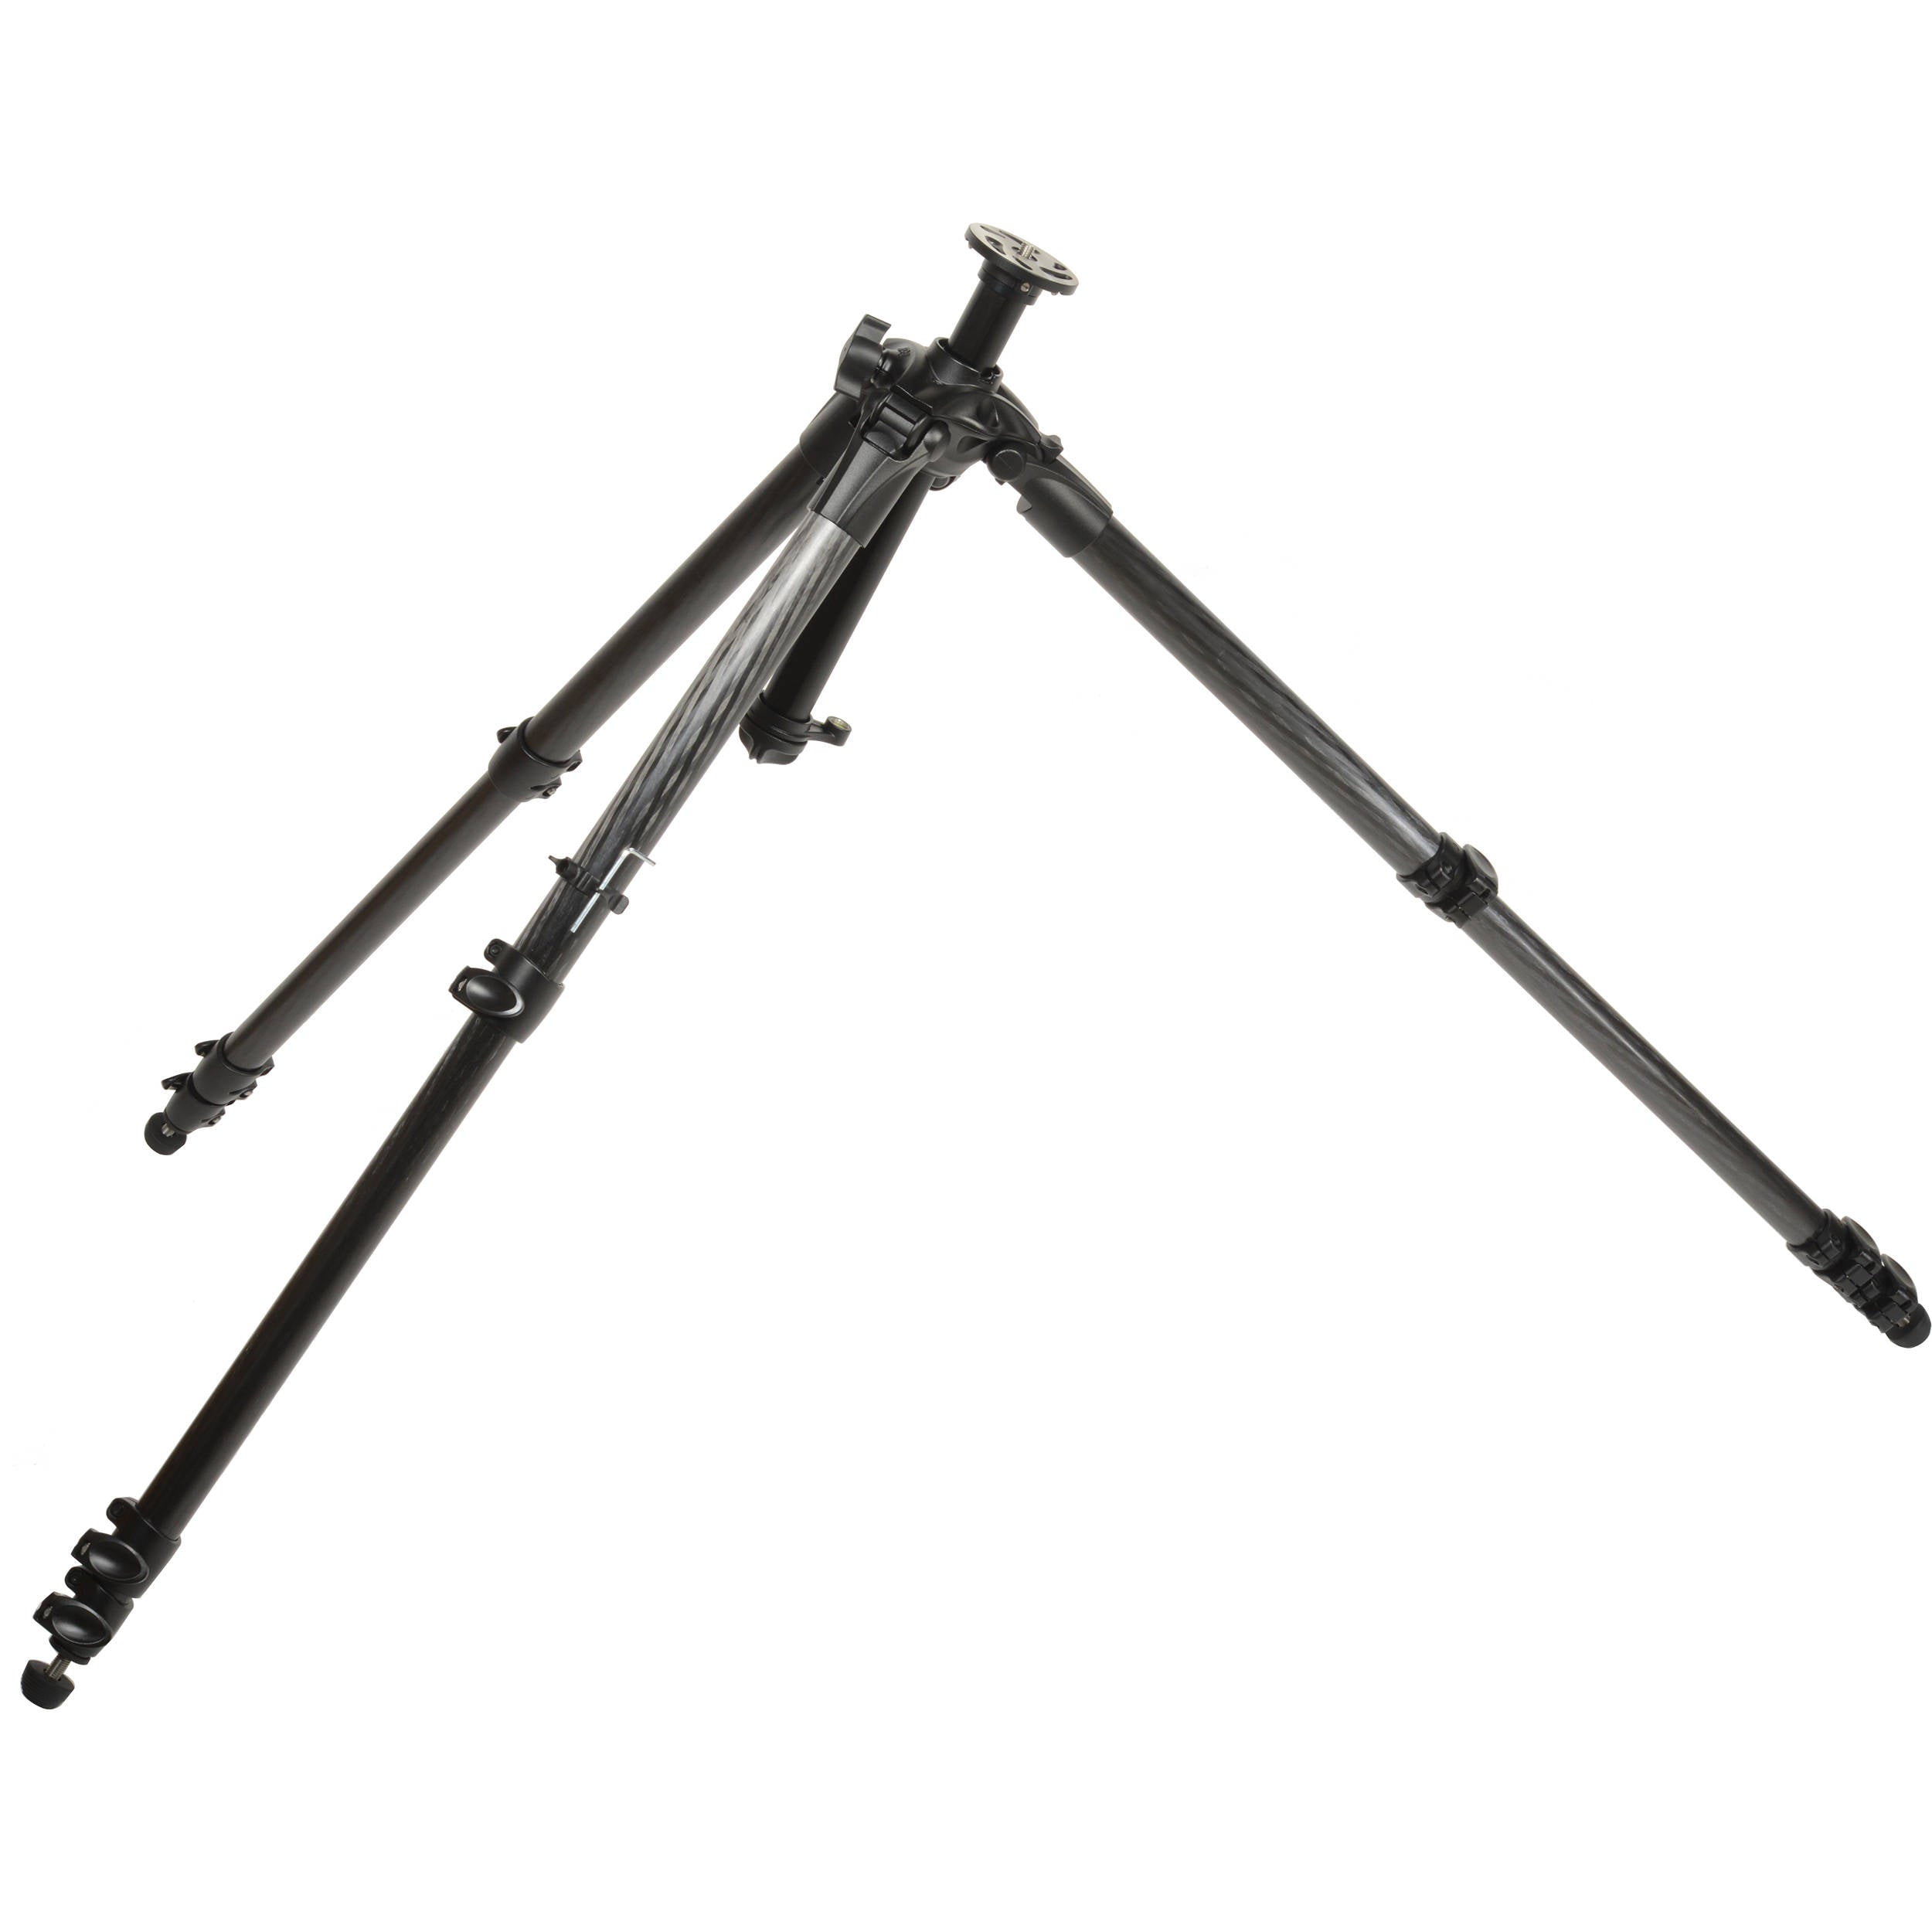 Manfrotto Carbon Fiber Tripod with Geared Center Column - 4-sections